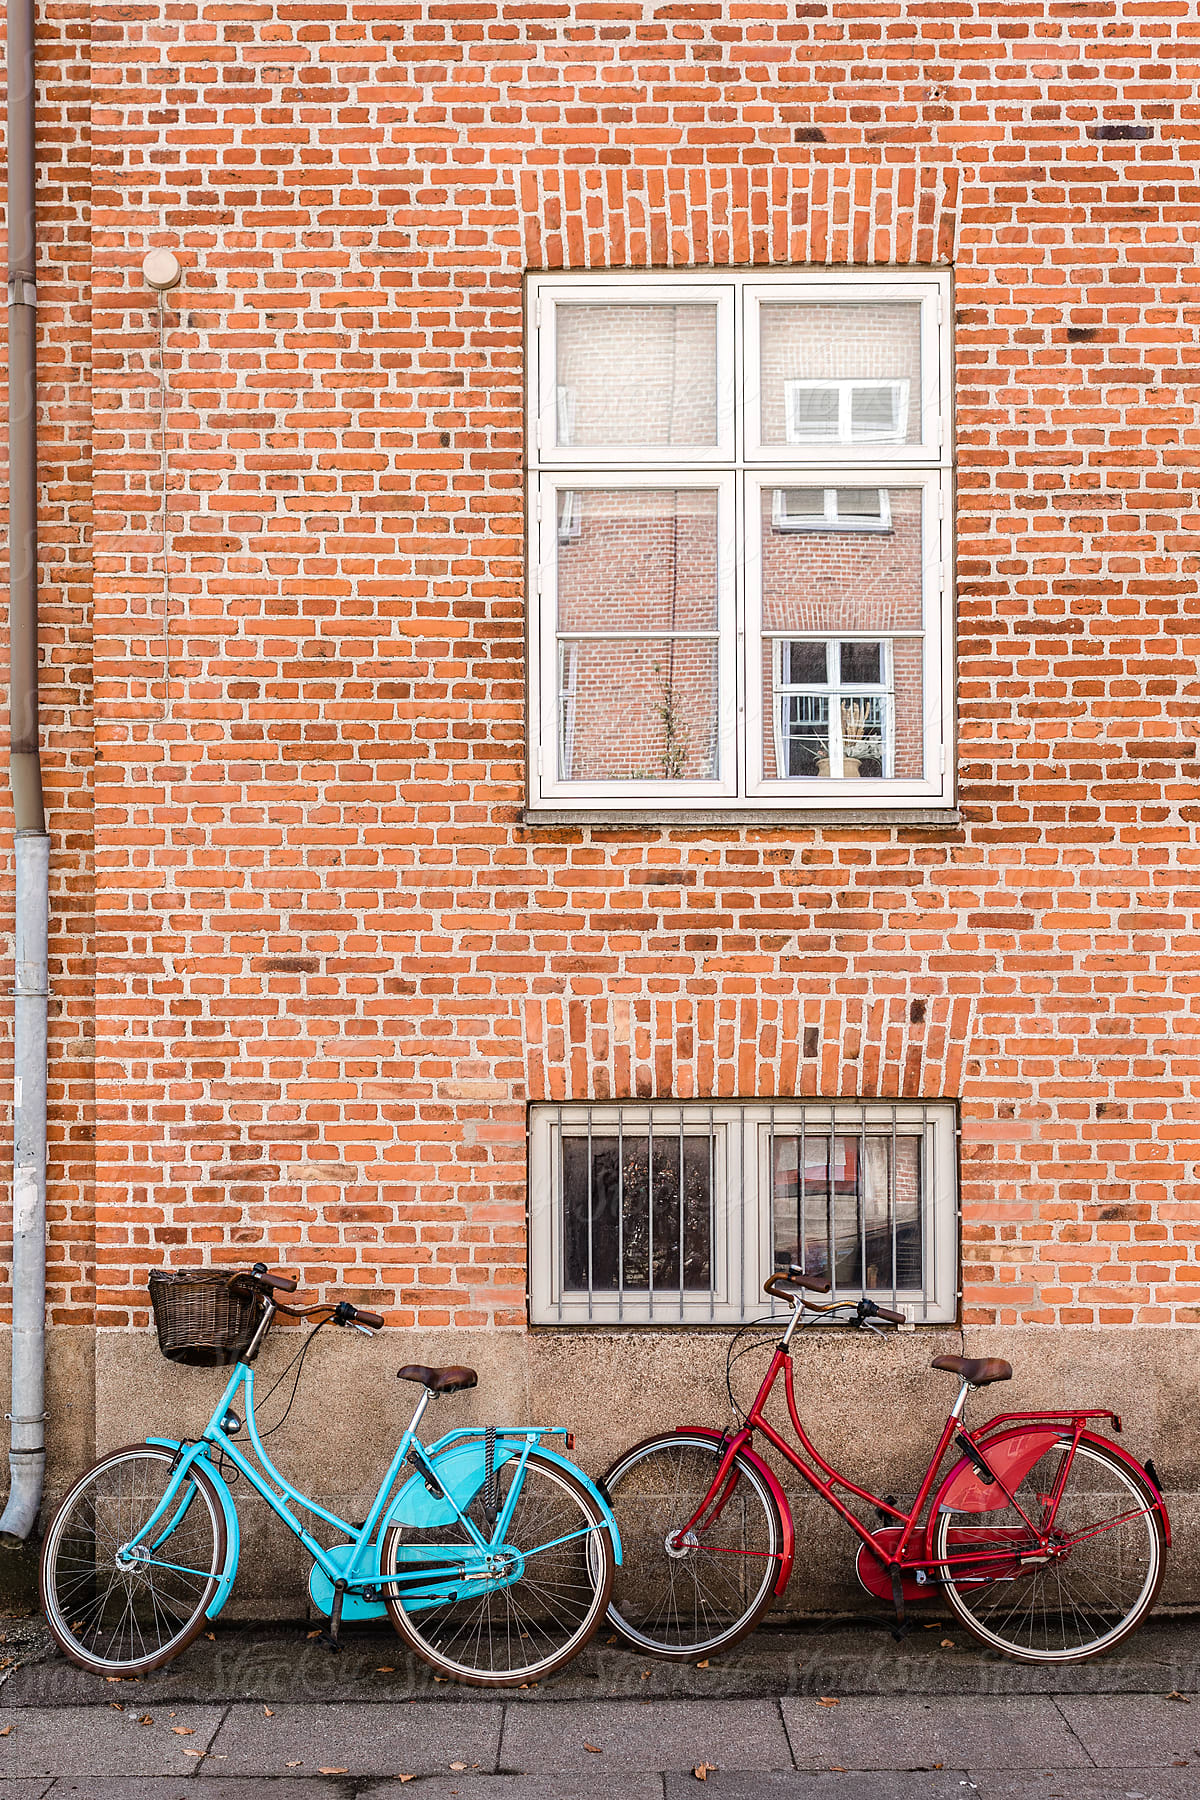 Parked bikes in front of house wall